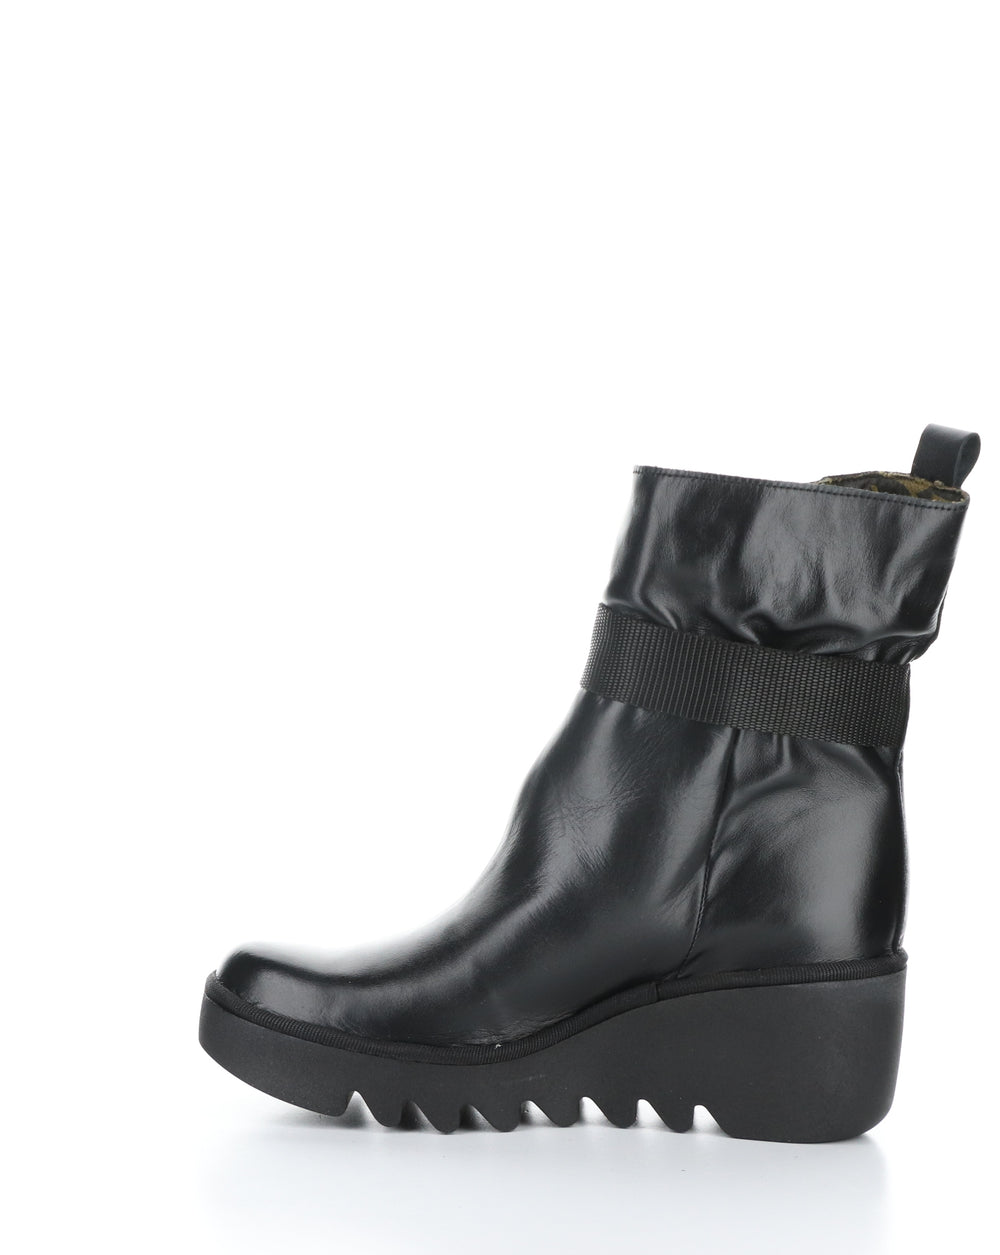 BLIT453FLY 000 BLACK Round Toe Boots